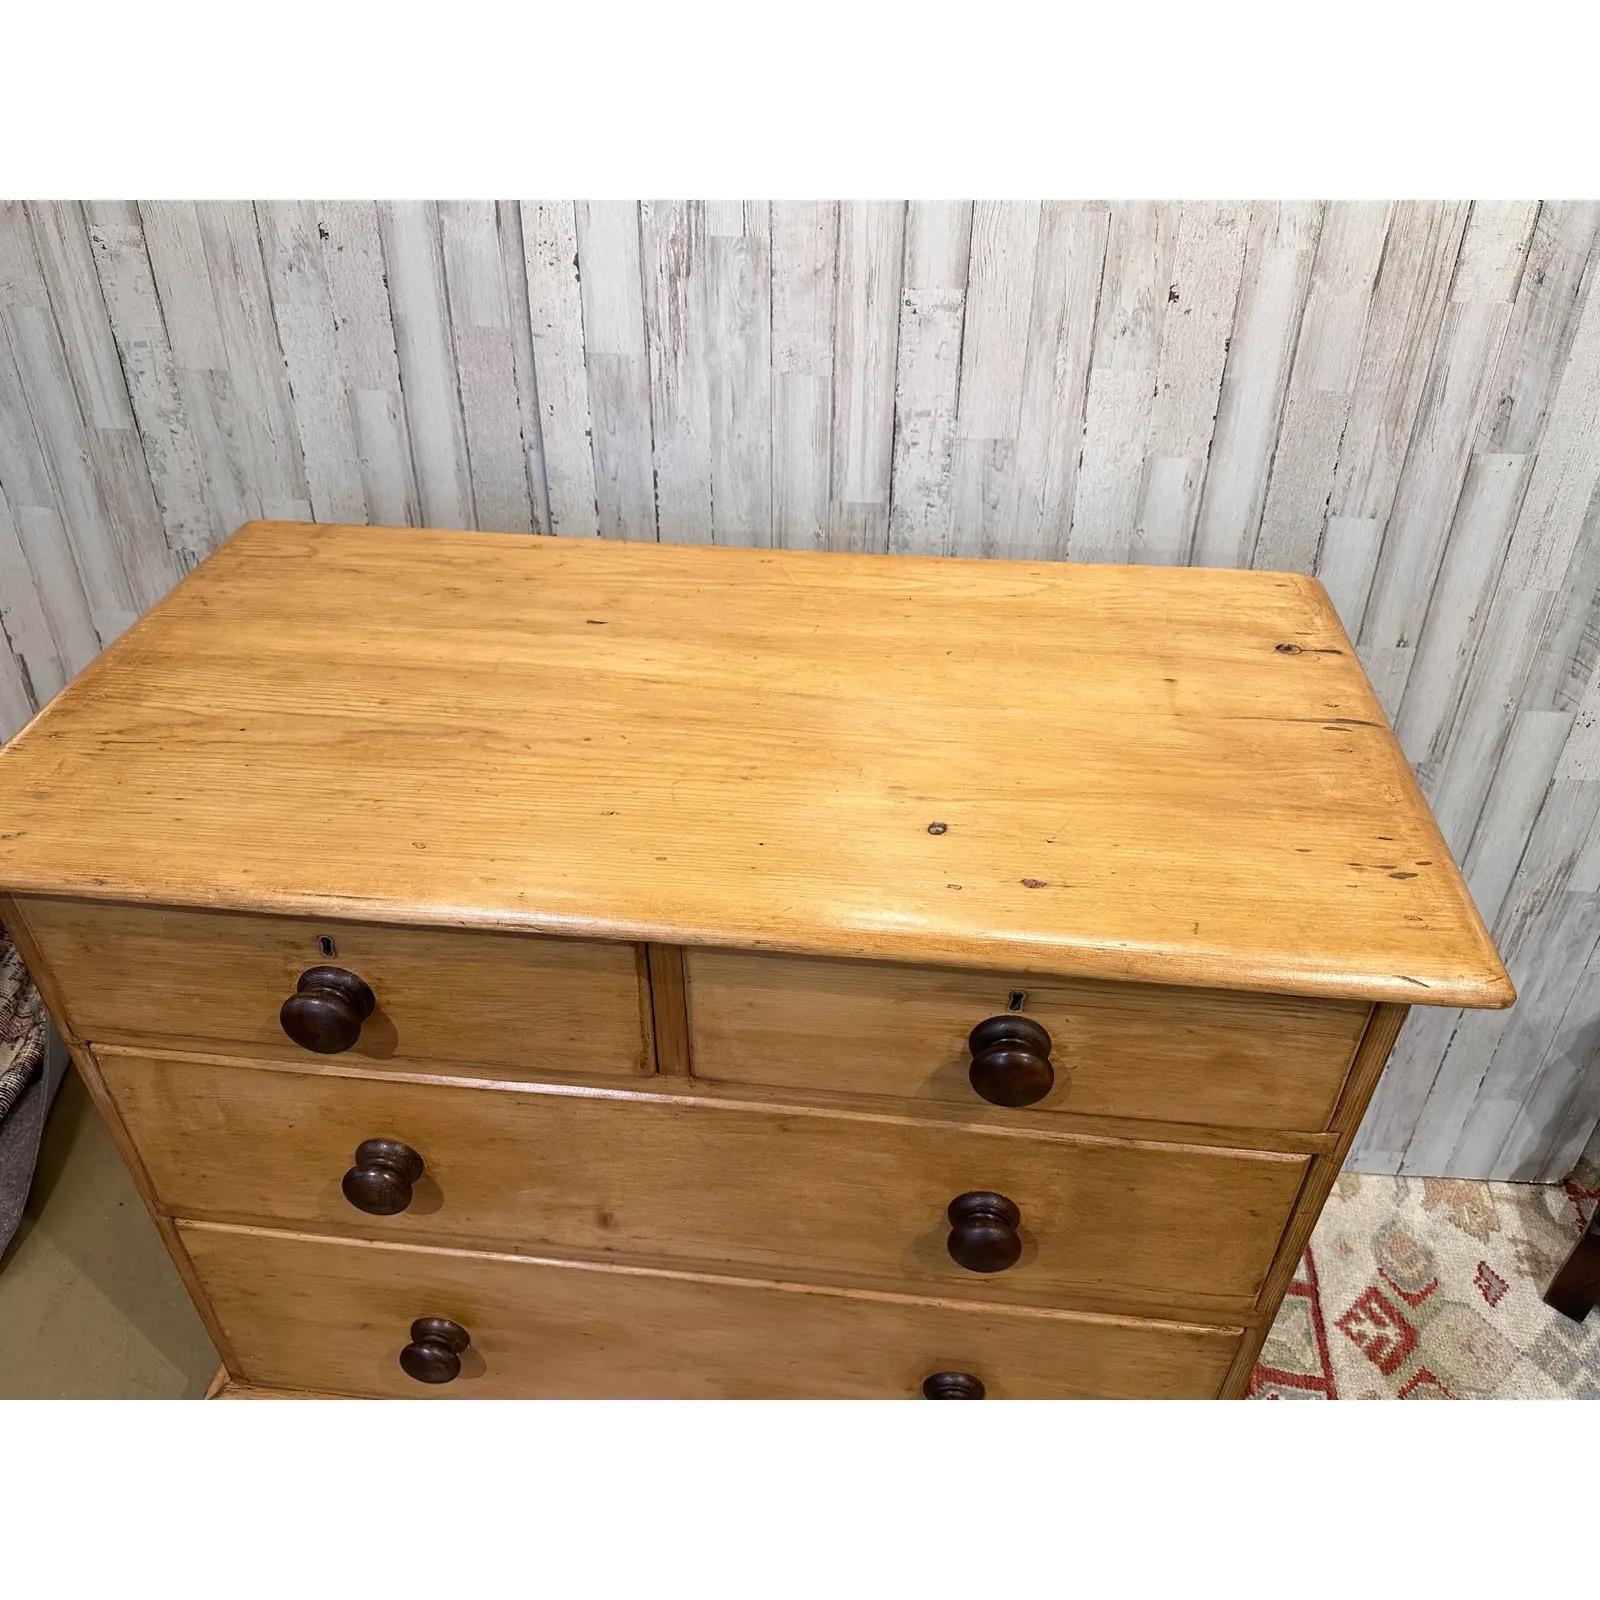 This is a lovely antique pine chest! This piece dates to the 19th century and has lovely patina. The wood has a warm glow, that is accented perfectly by the darker stained knobs. Being a two over two design with a casual simple feel. This chest